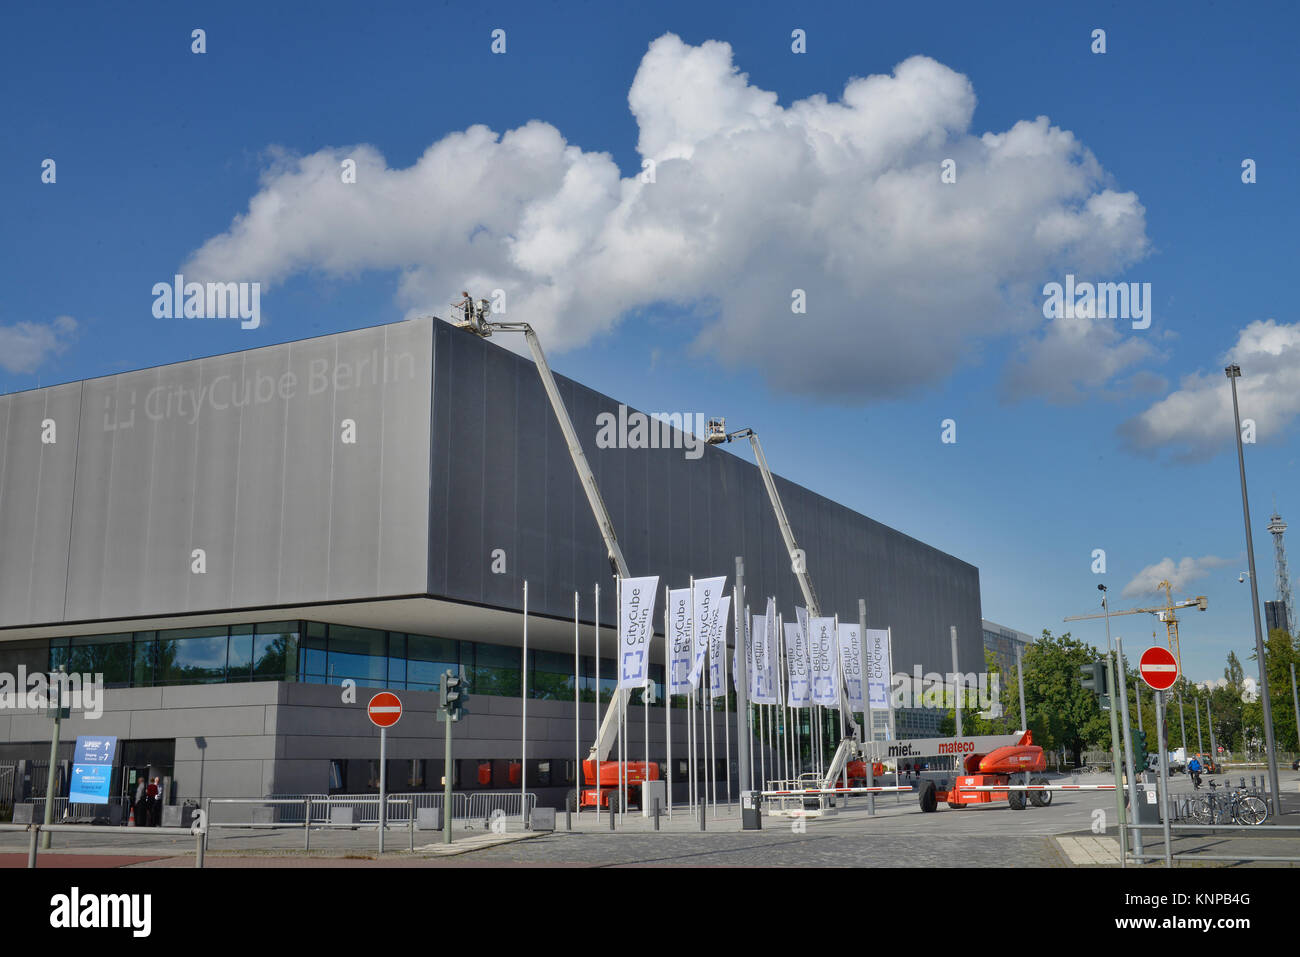 Messehalle High Resolution Stock Photography and Images - Alamy